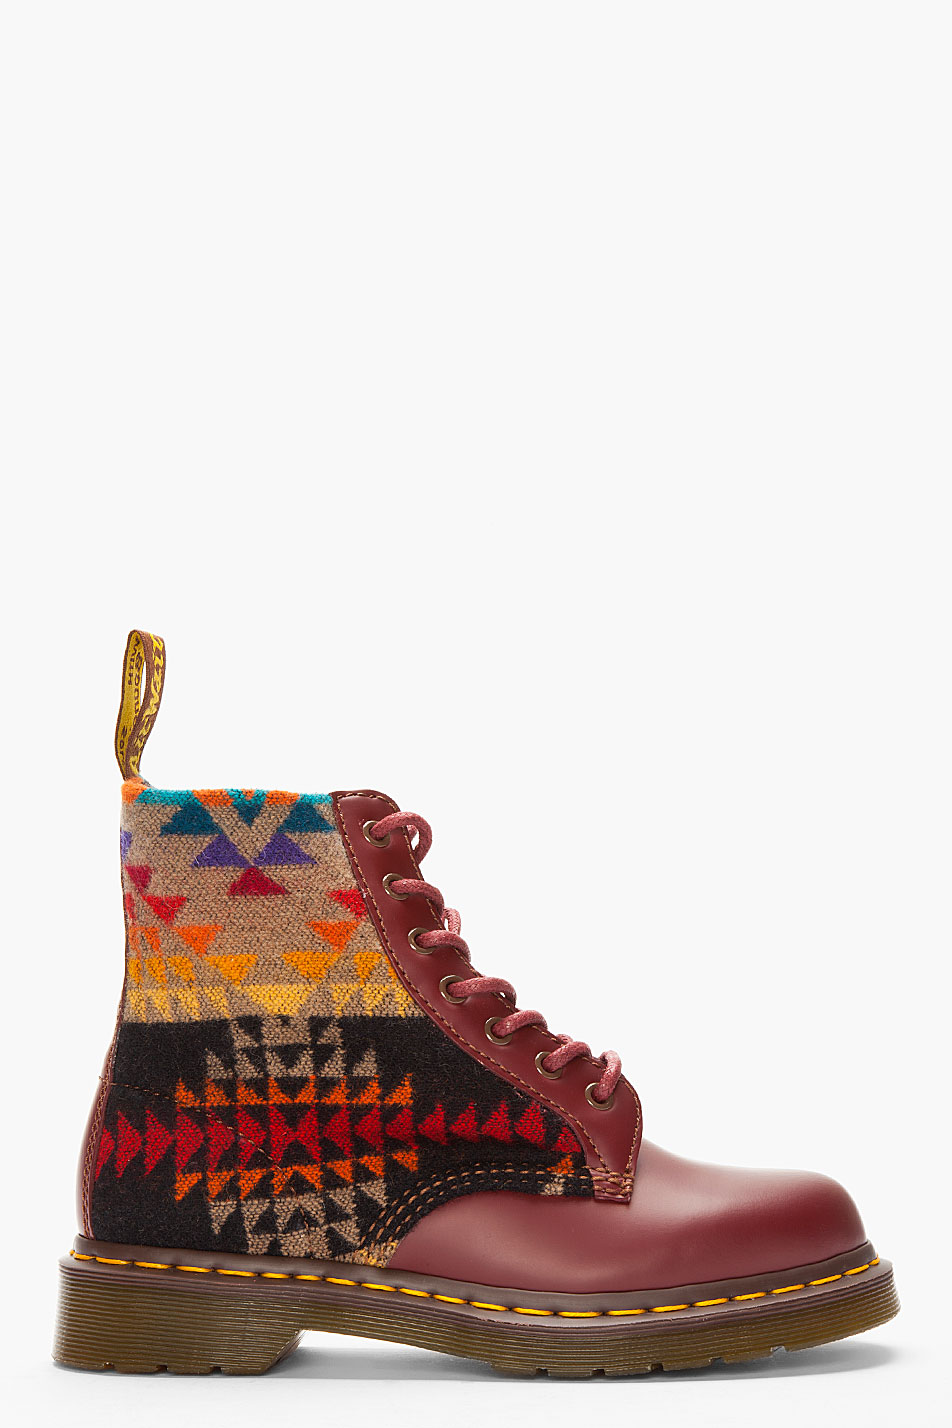 Dr. Martens Burguny Printed Wool Pendleton Edition Boots in Brown for ...